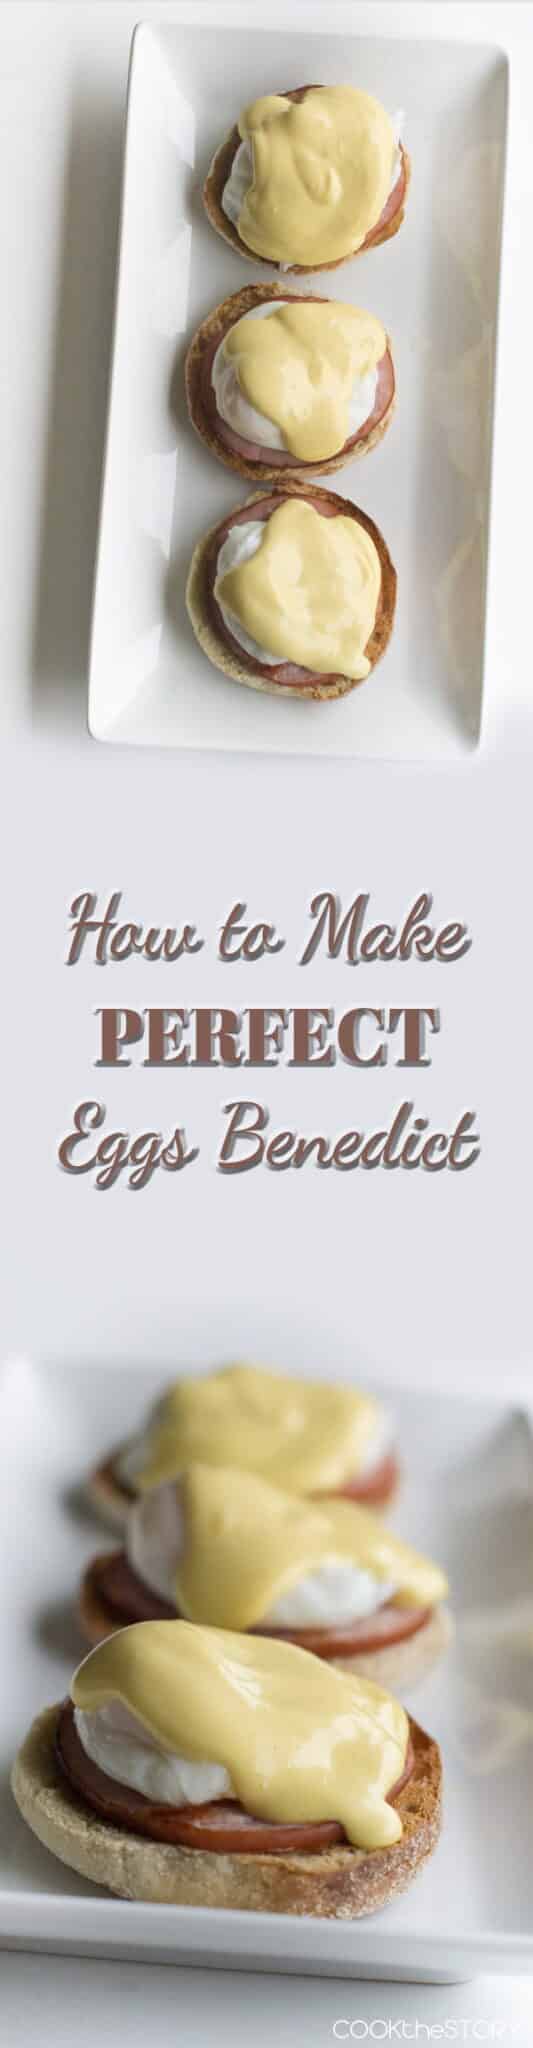 How To Make The Perfect Eggs Benedict, Easily